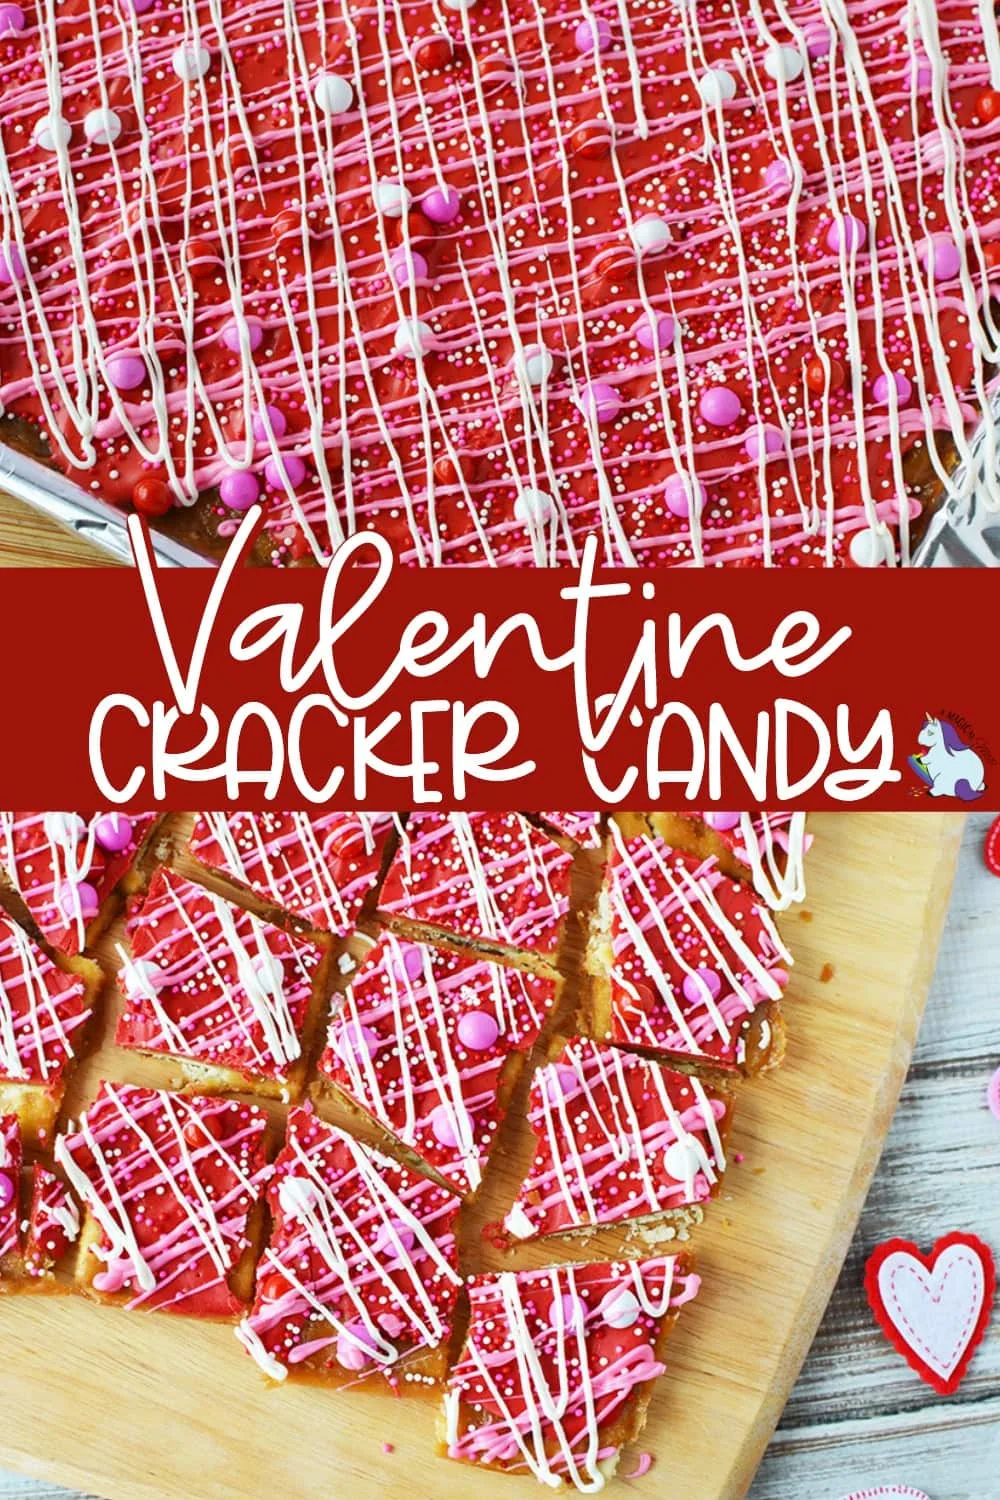 Cracker candy with Valentine's day colors